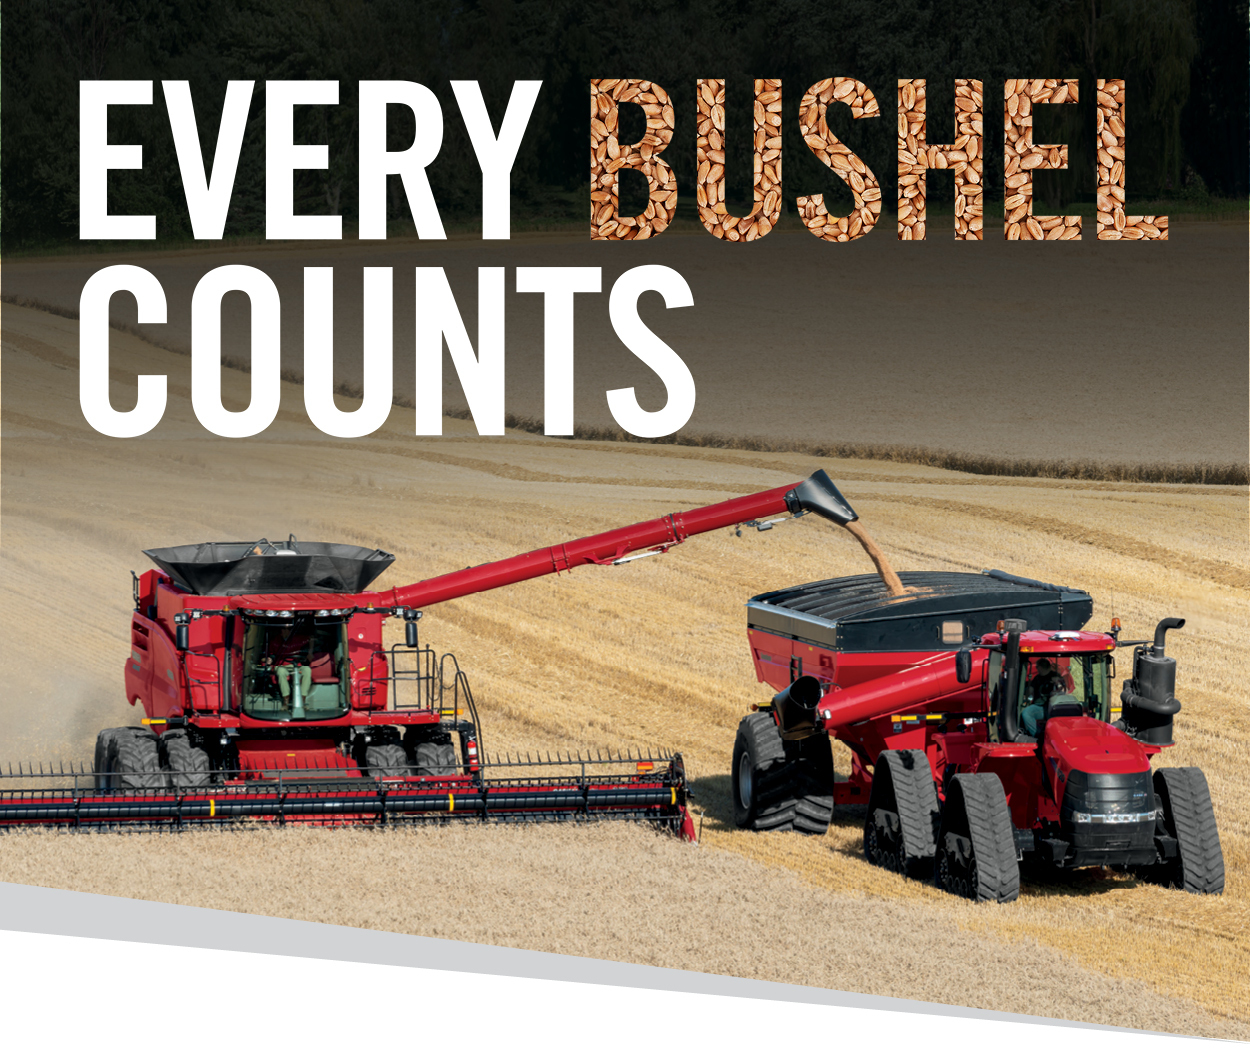 Fire Protection - Every Bushel Counts